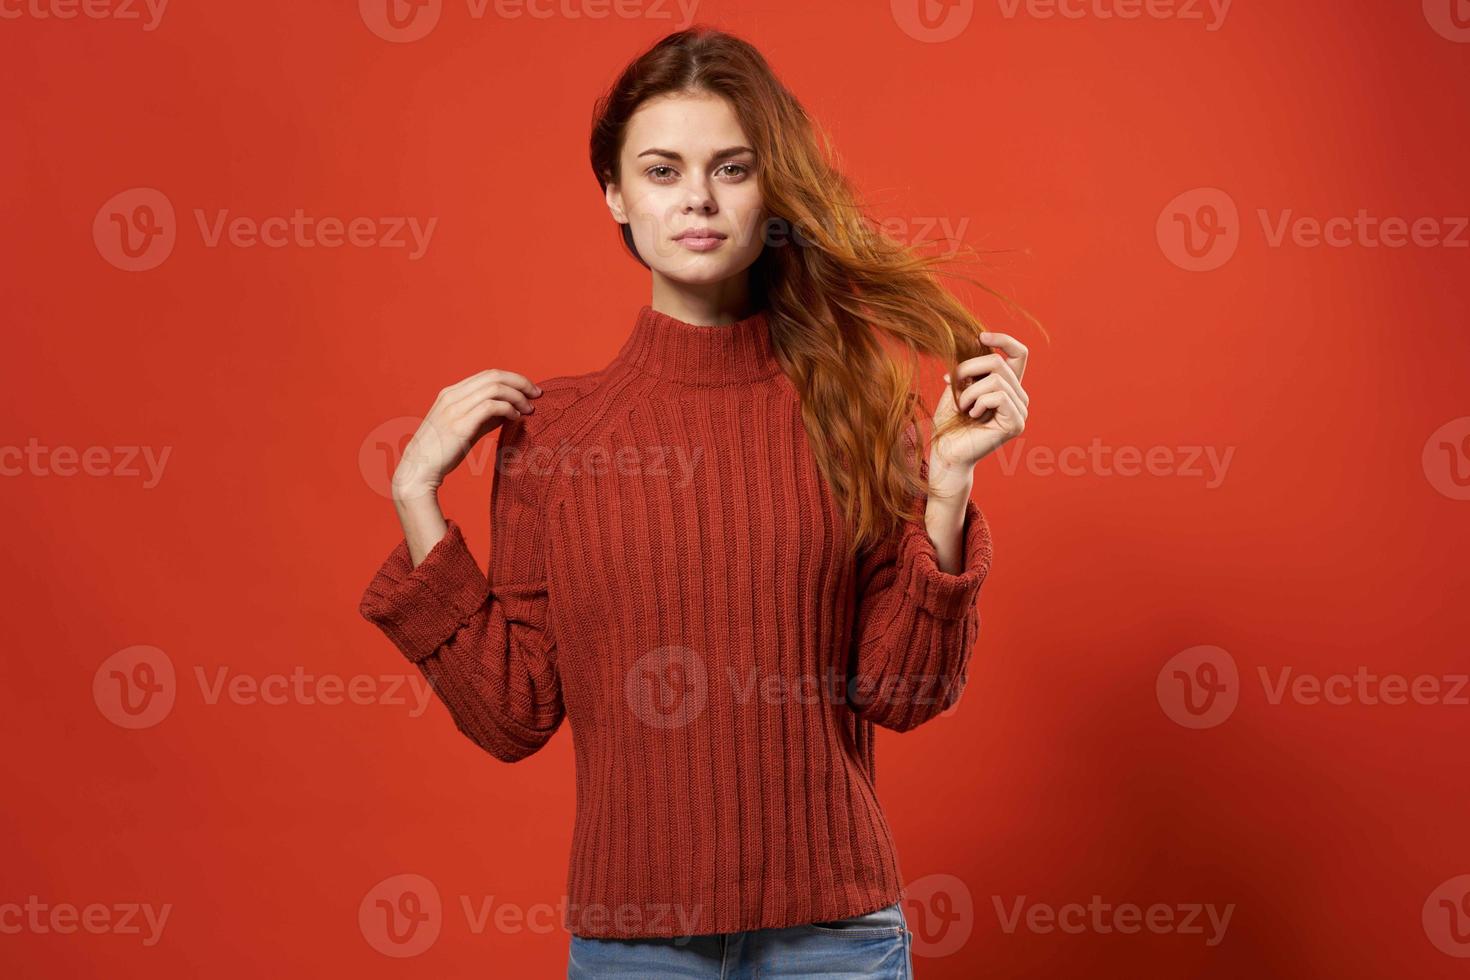 woman in red sweater glamor fashion posing isolated background photo